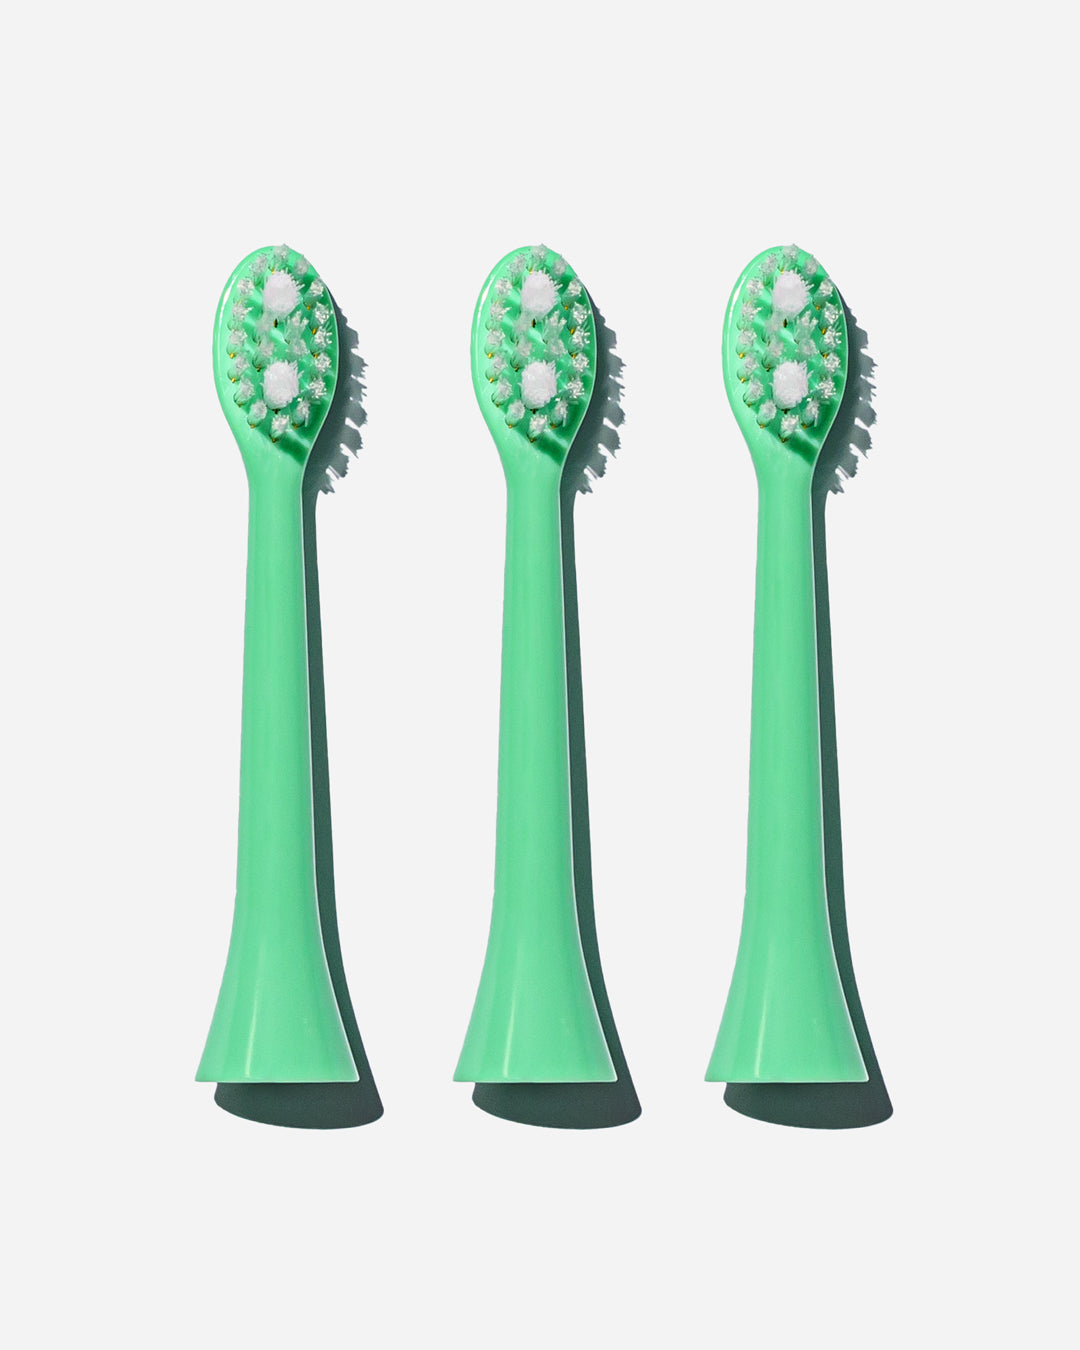 Sonic Toothbrush Replacement Heads - Coral Green